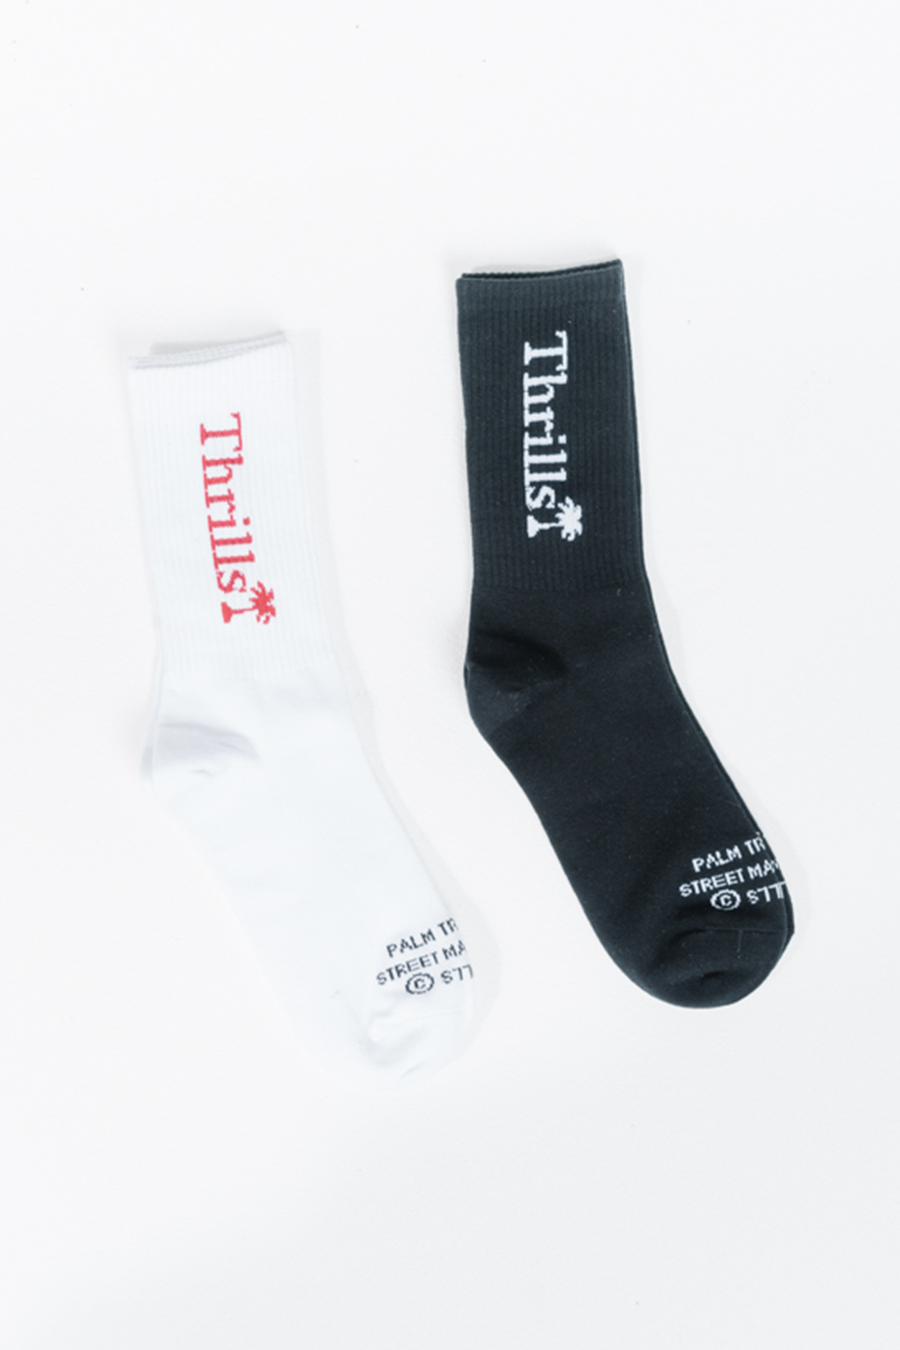 Palm of Thrills 2 Pack Sock | Black/White - Main Image Number 1 of 1